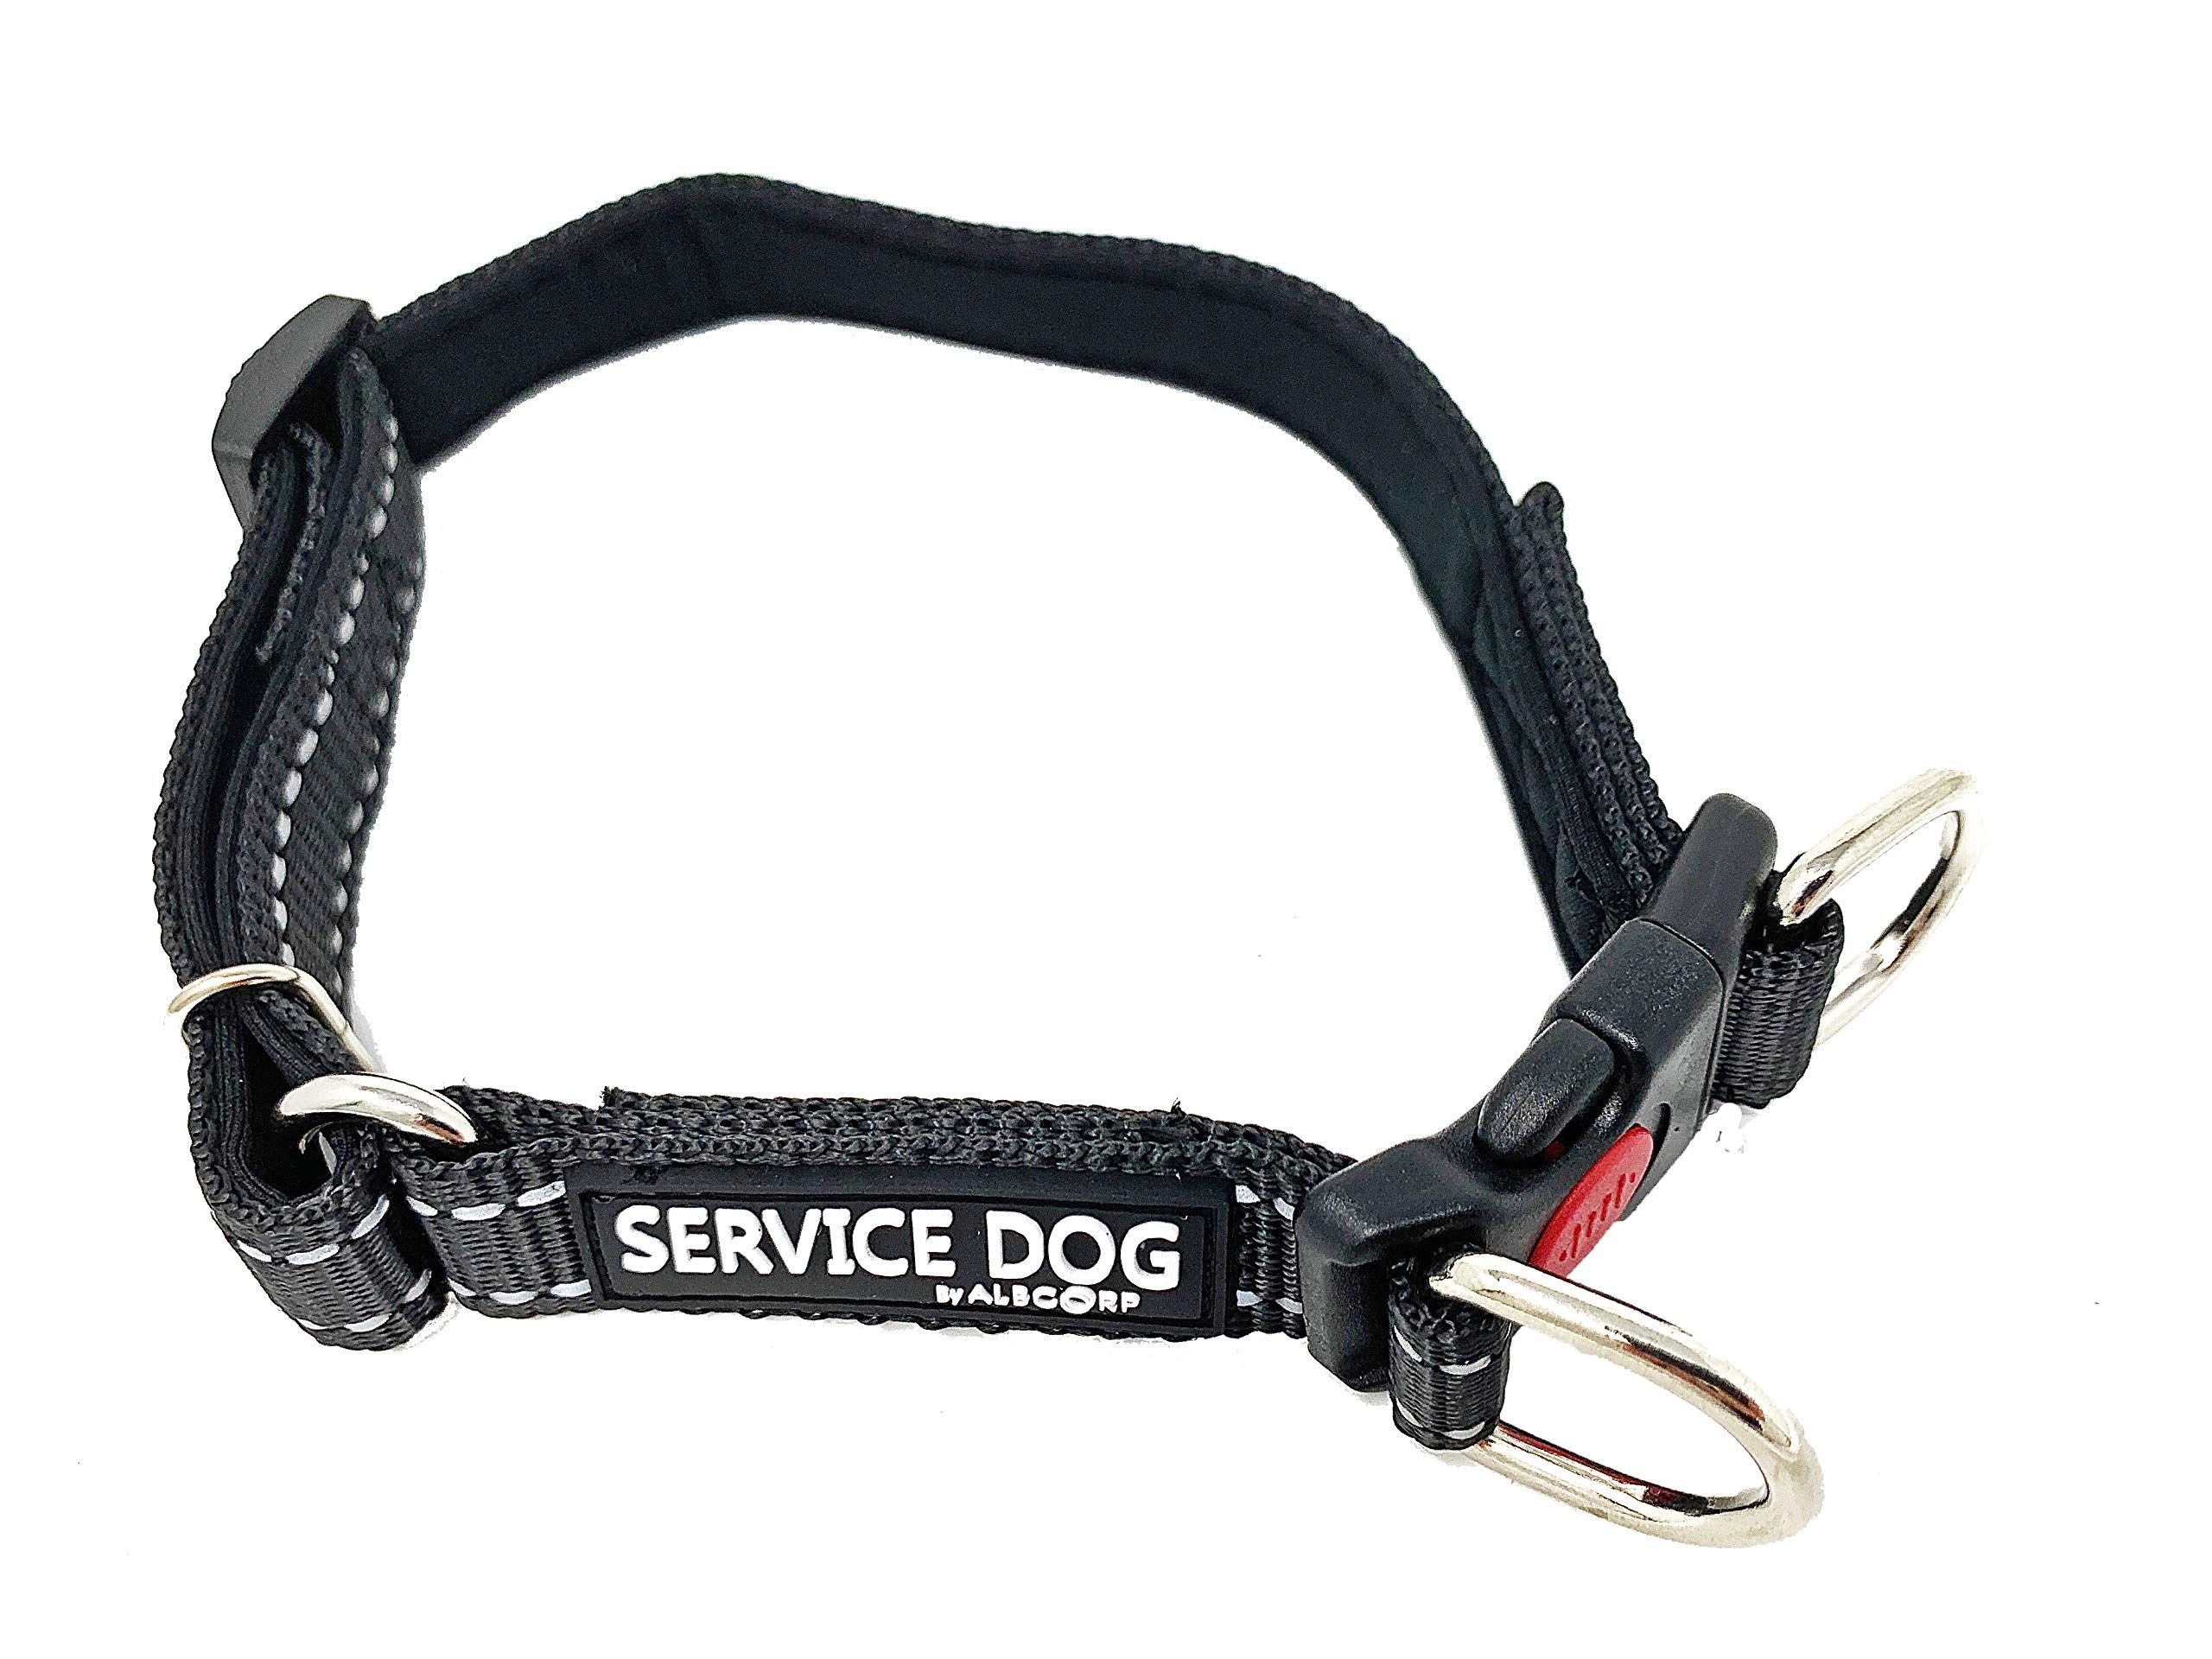 Albcorp Reflective Service Dog collar - Service Dog Rubber Patch - Durable D-Ring for Service Animal Leashes or ID Tags, Medium,